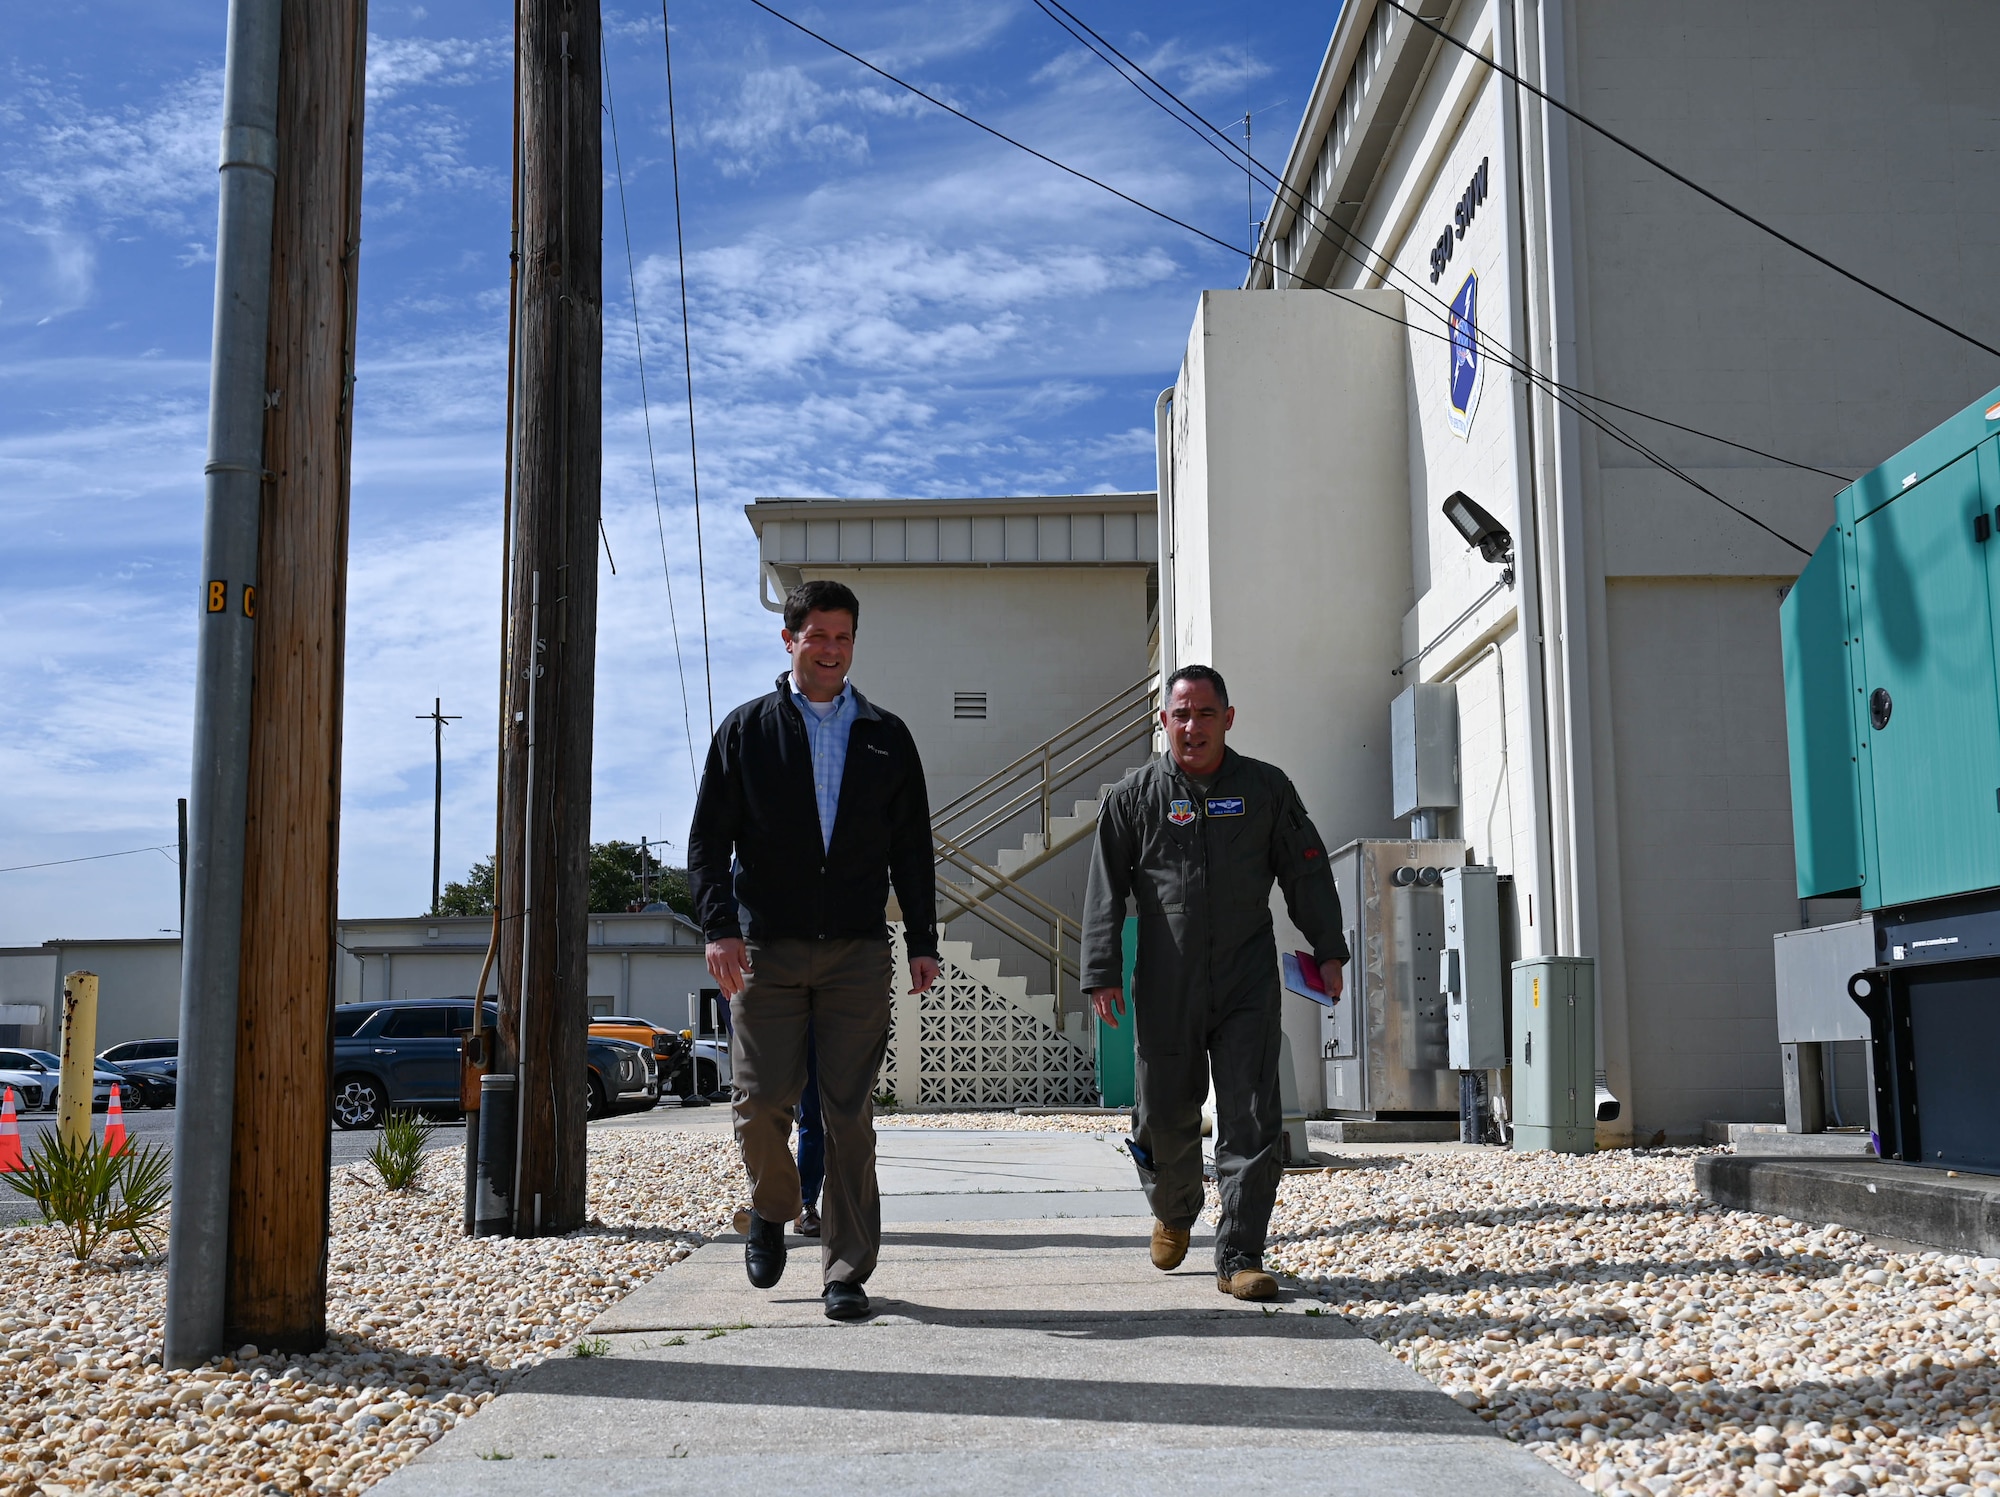 Dr. John Plumb, Assistant Secretary of Defense for Space Policy, walks alongside U.S. Air Force Col. Josh Koslov, 350th Spectrum Warfare Wing commander, during a visit to the 350th SWW at Eglin Air Force Base, Fla., March 11, 2024. Plumb’s portfolio encompasses the DOD’s strategic capabilities for integrated deterrence: space and missile defense, nuclear weapons, countering weapons of mass destruction, and, at the time of publication, , electromagnetic warfare and cyber. (U.S. Air Force photo by Capt. Benjamin Aronson)